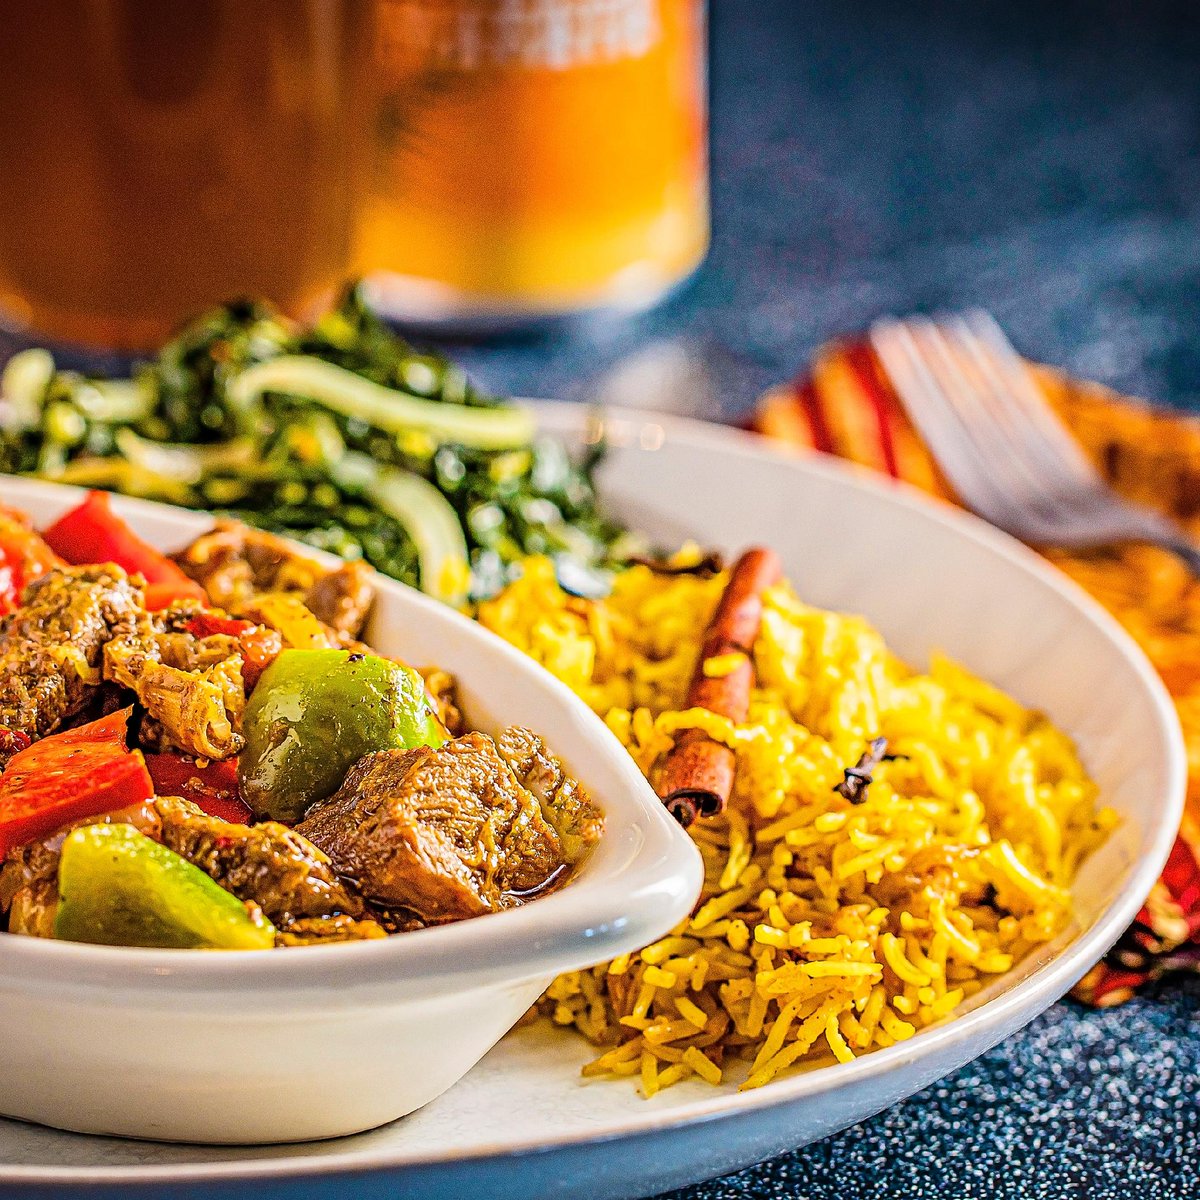 Have you tried our Mbuzi Mchuzi (Goat Stew)? Enjoy delicious chunks of goat meat served with Pilau Rice and Spinach!
. 
#HakunaMatataGrill #FineAfricanCuisine #AuthenticEastAfricanFood #AthenticAfricanFood #supportyourlocalrestaurants #eatlocal #eaterdc #moco